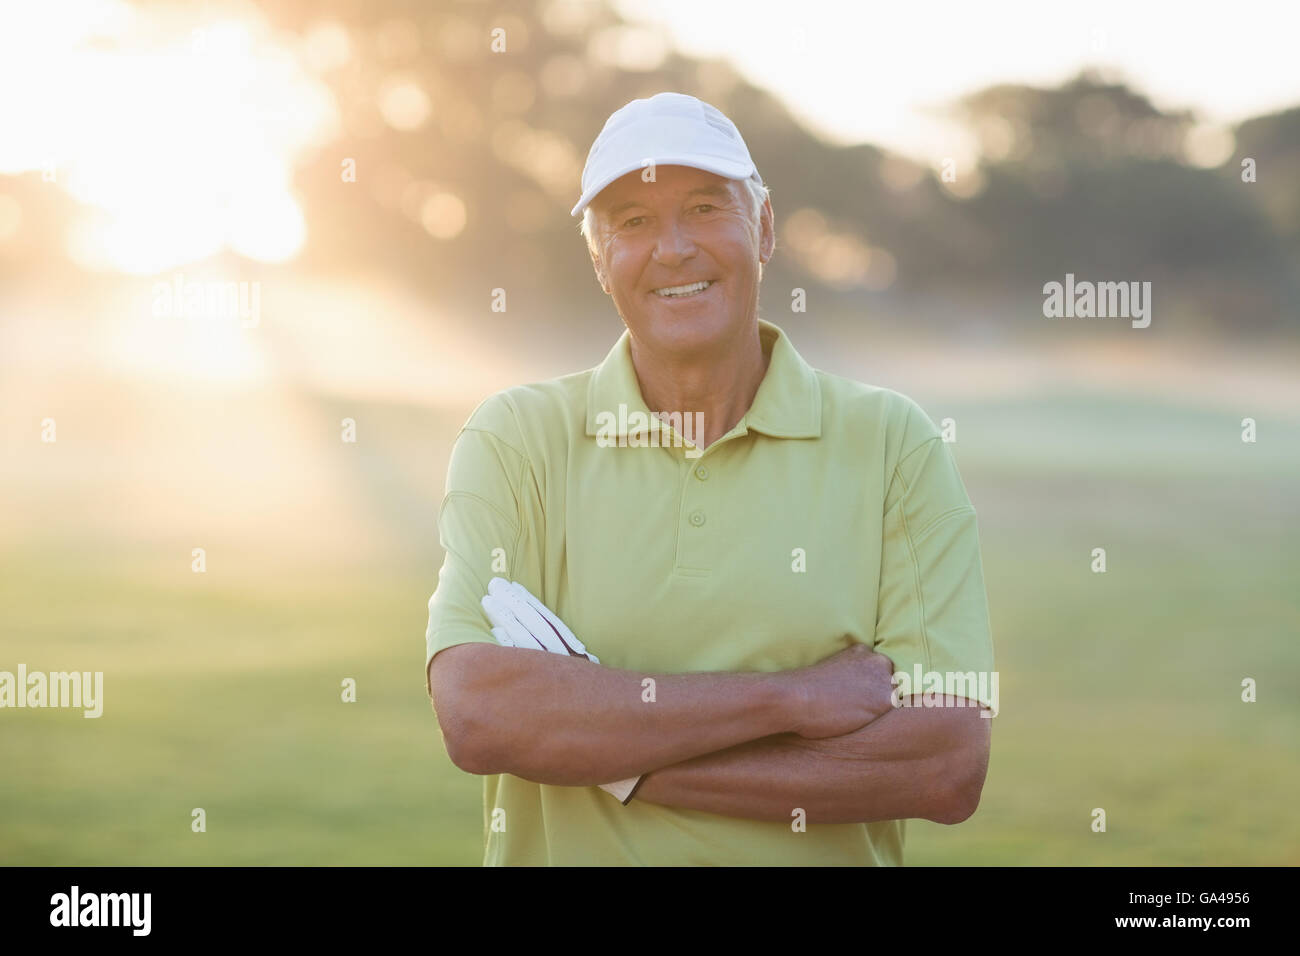 Portrait of smiling golfer with arms crossed Banque D'Images